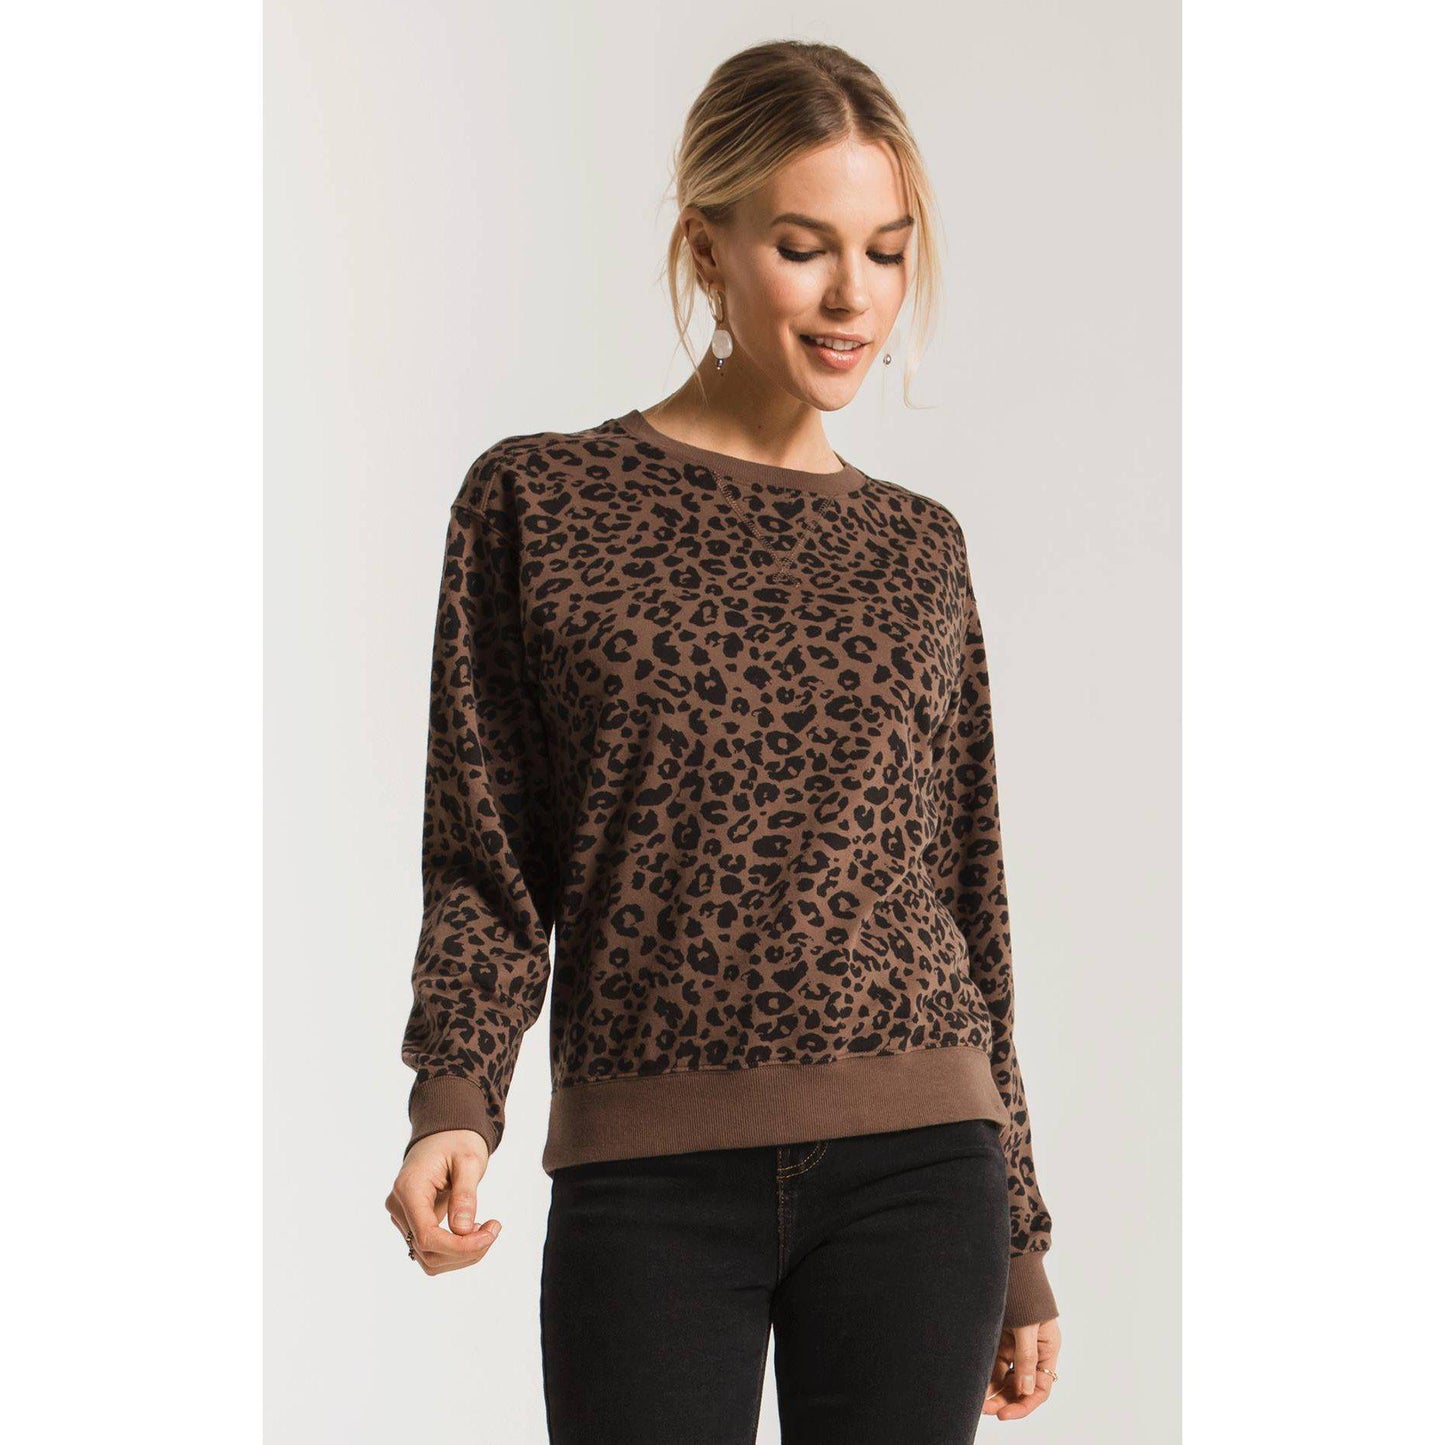 The Leopard Pullover